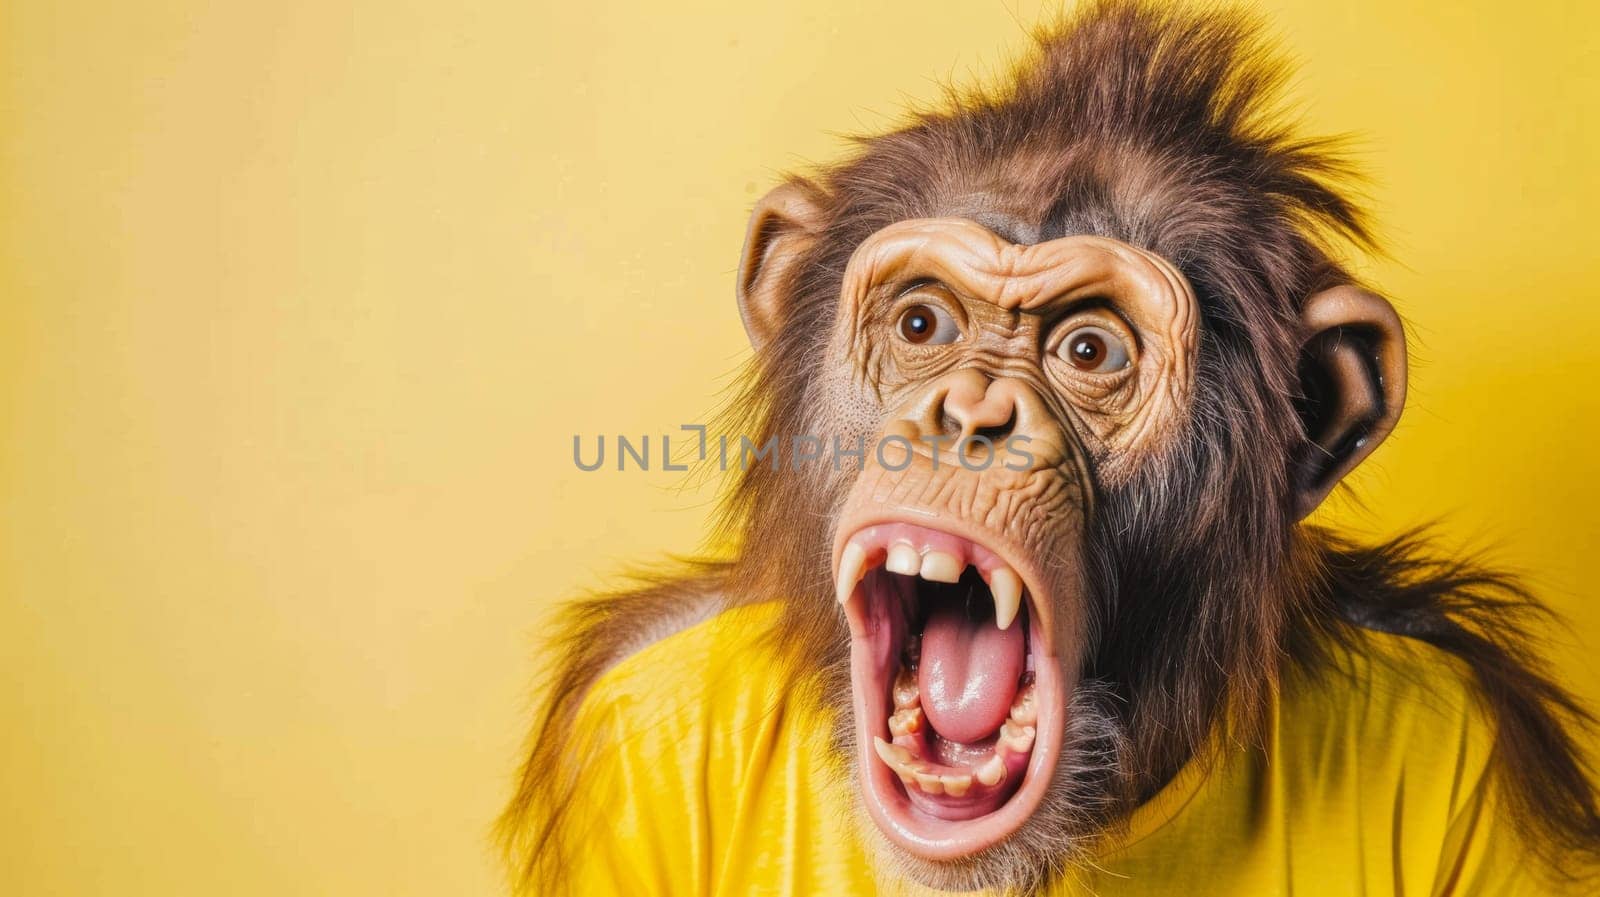 A monkey with a yellow shirt and fake teeth on